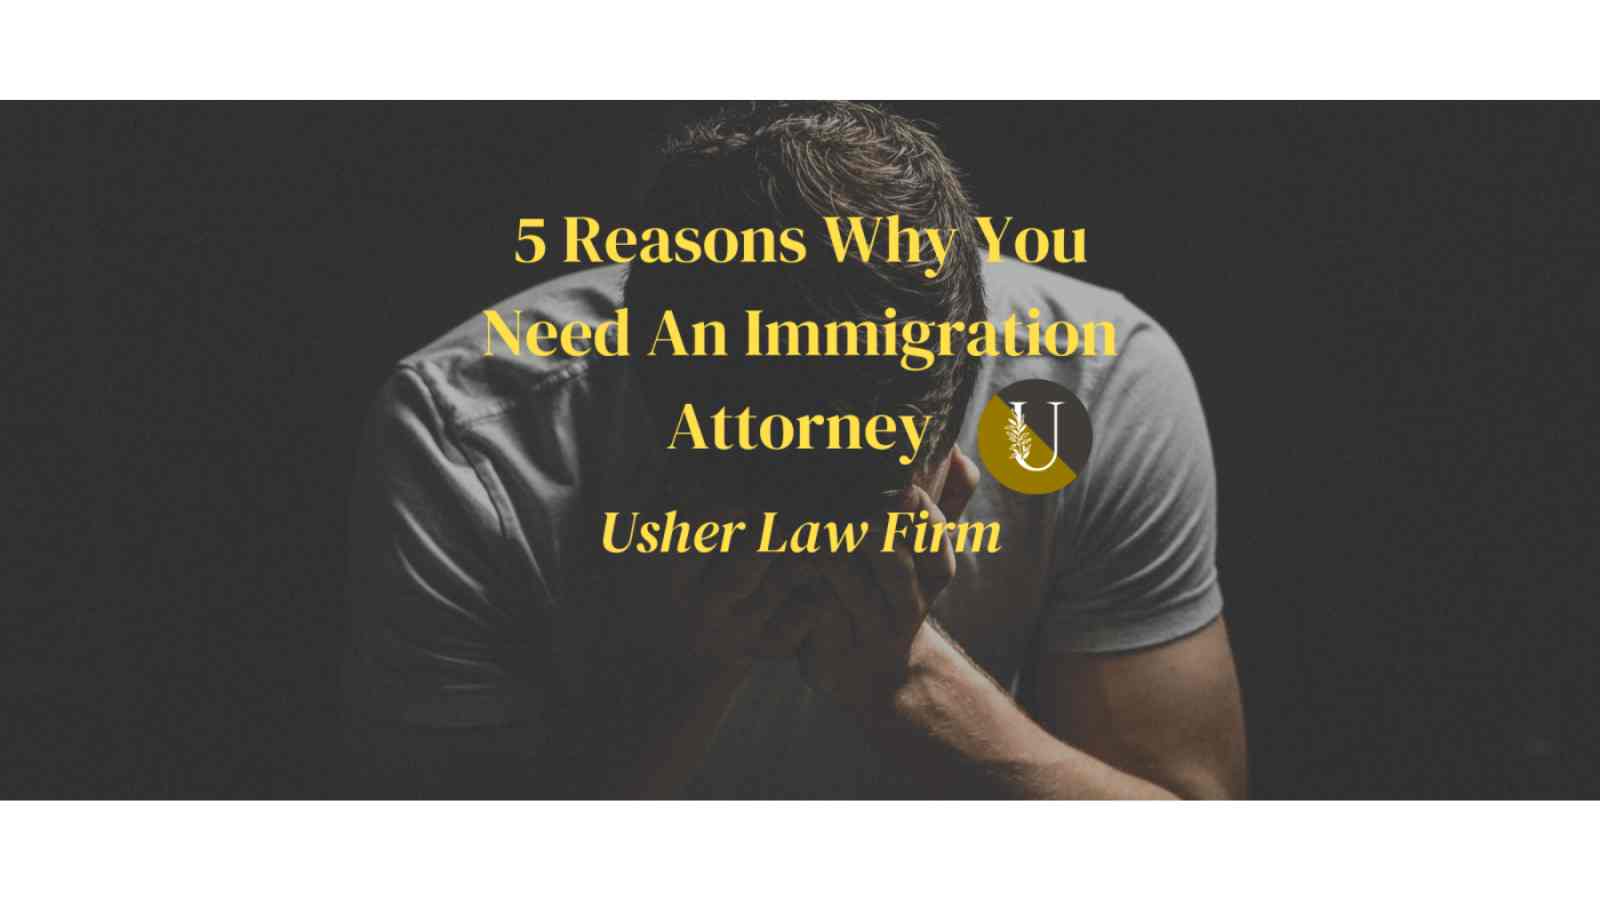 Why You Need An Immigration Lawyer_usher law firm